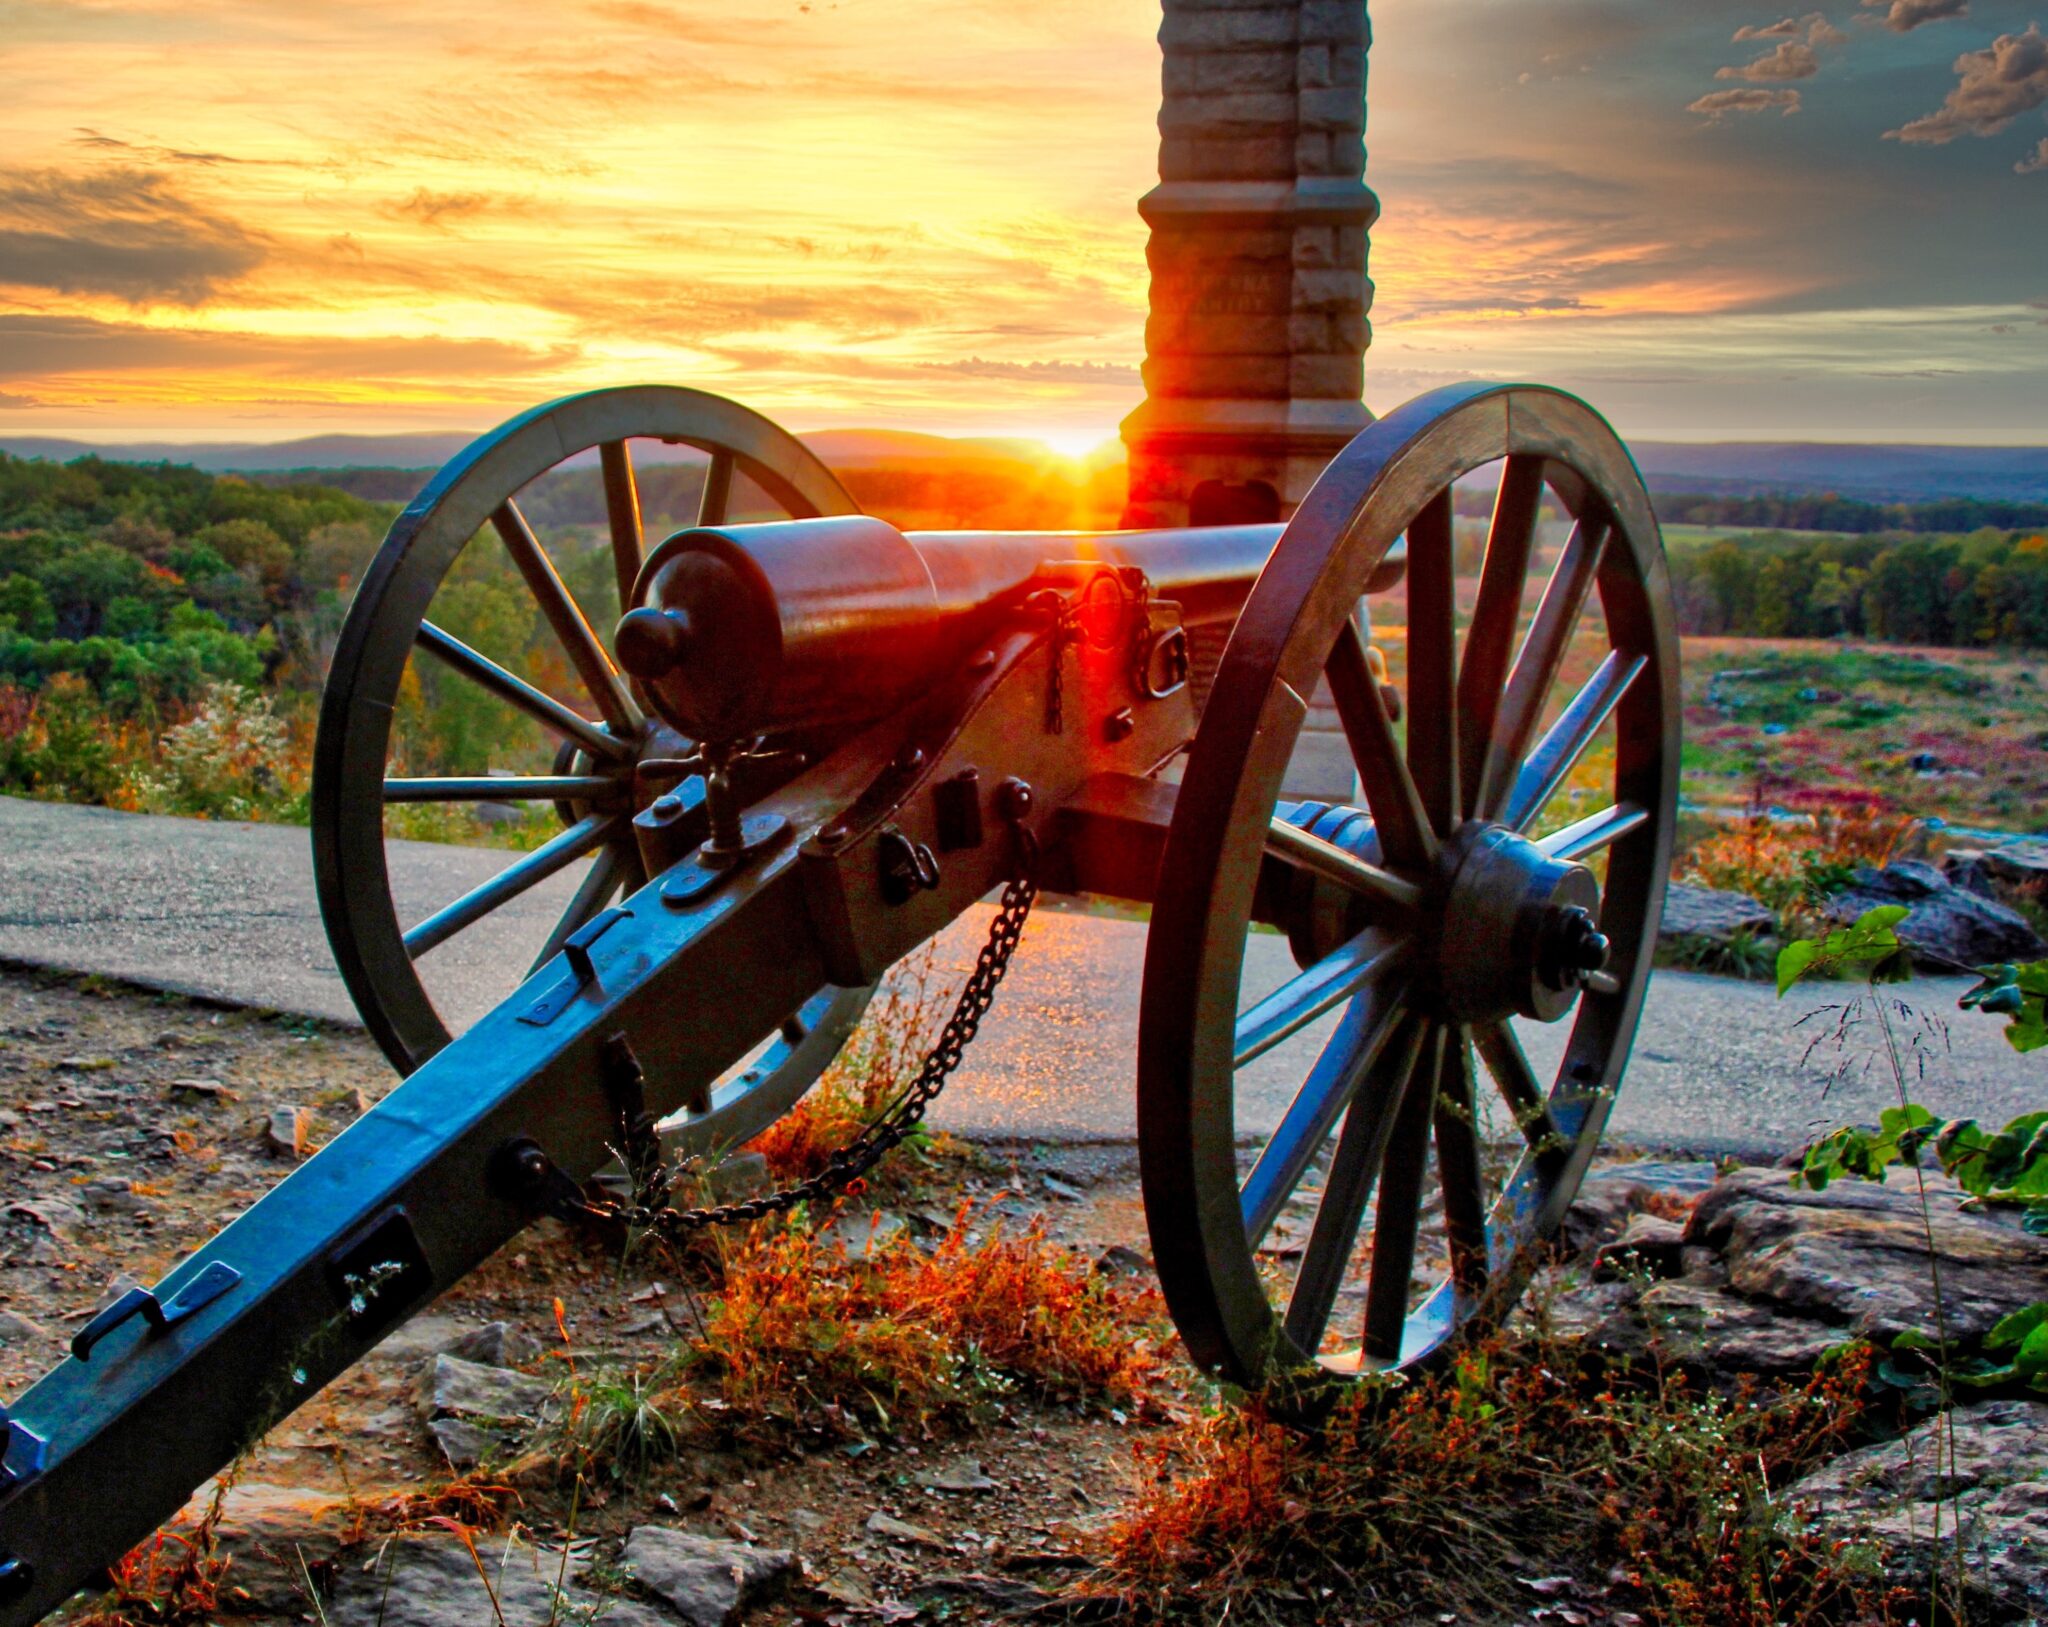 Civil war cannon during a sunset